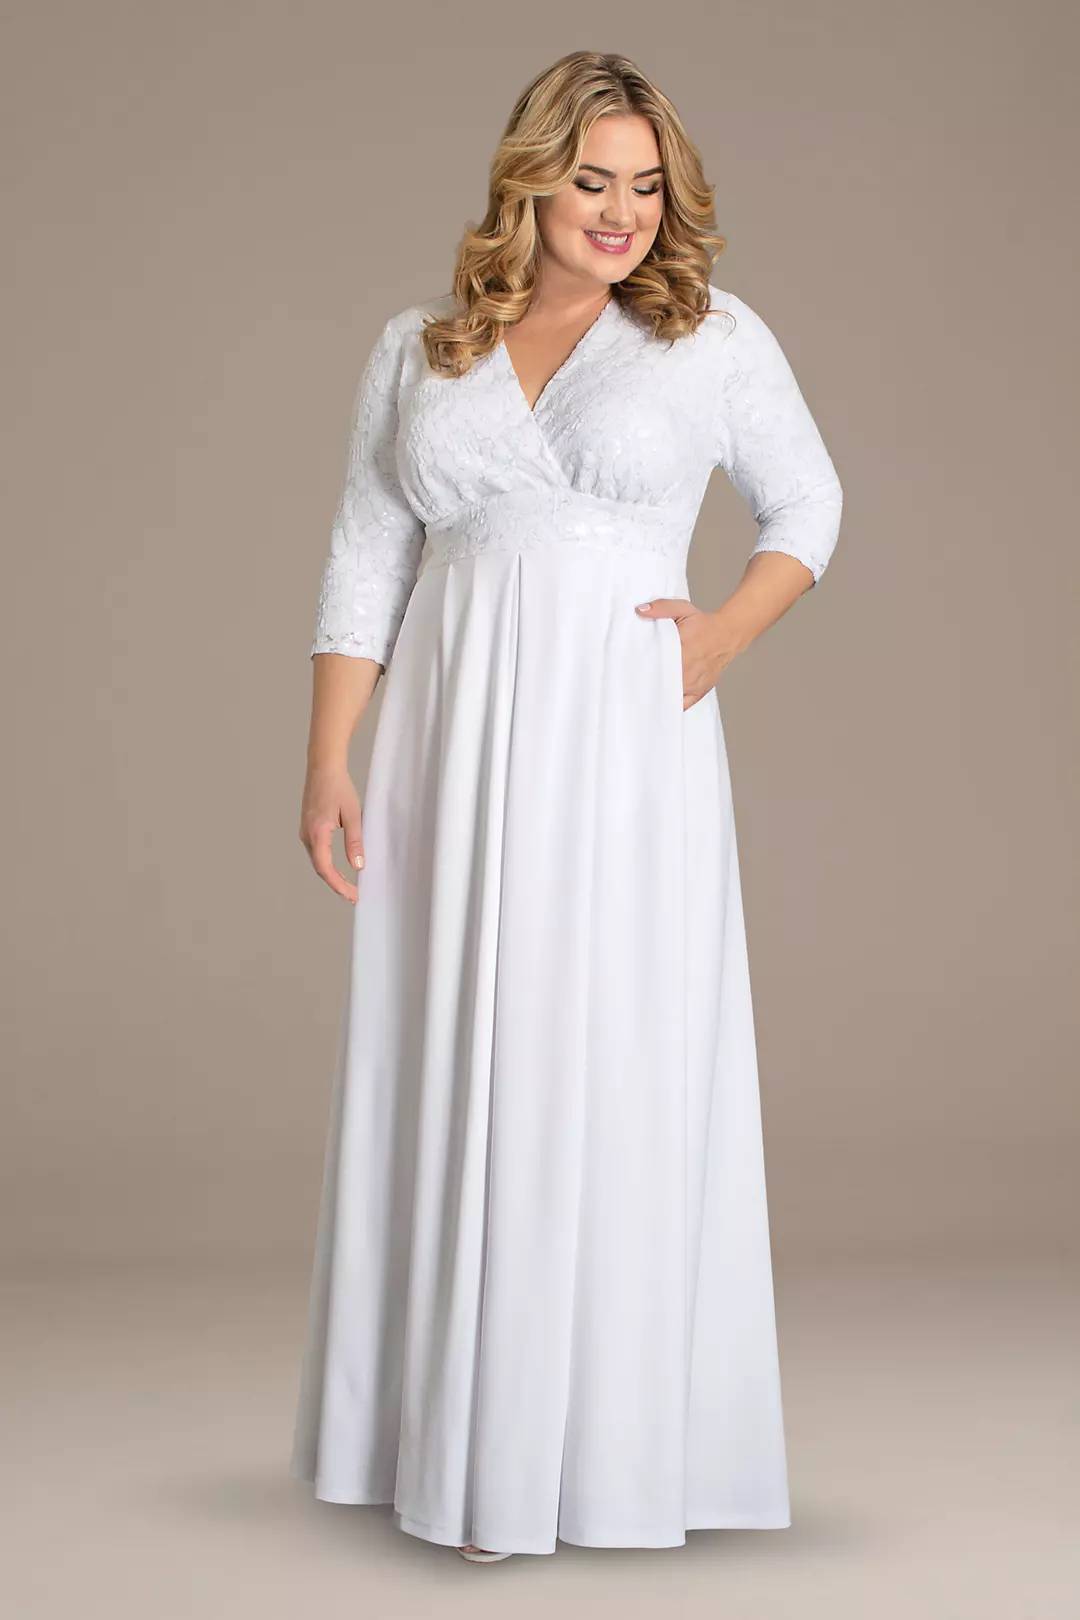 Starlight Sequin Plus Size A-Line Wedding Gown Image